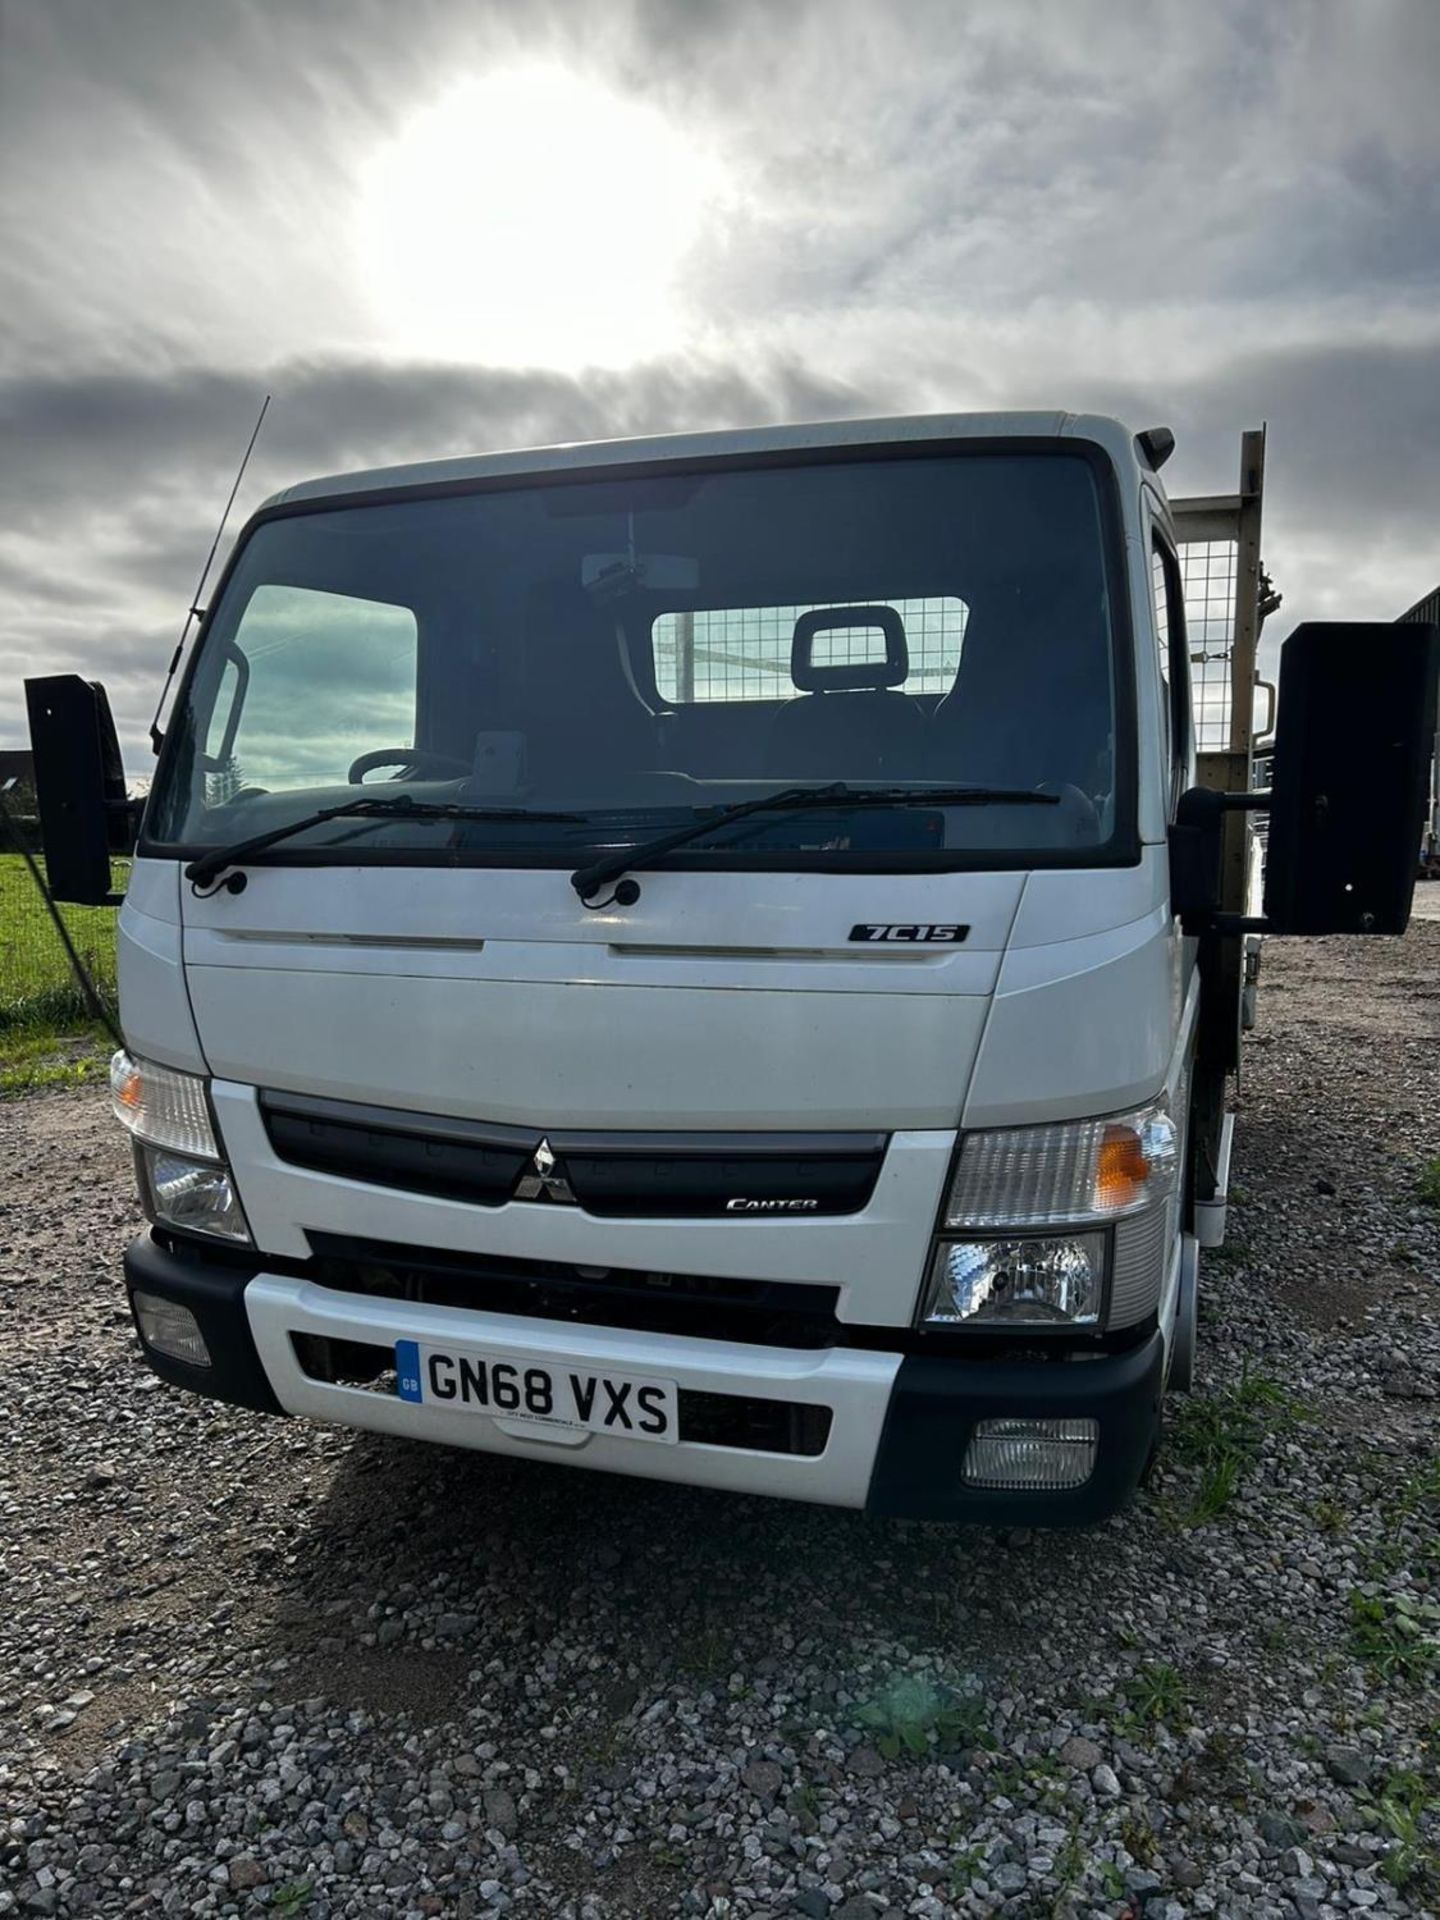 MITSUBISHI FUSO CANTER 7C1534 DROPSIDE LORRY EURO VI C GN68VXS FIRST REG 2019 MOT AUGUST 2024 HAD - Image 2 of 8